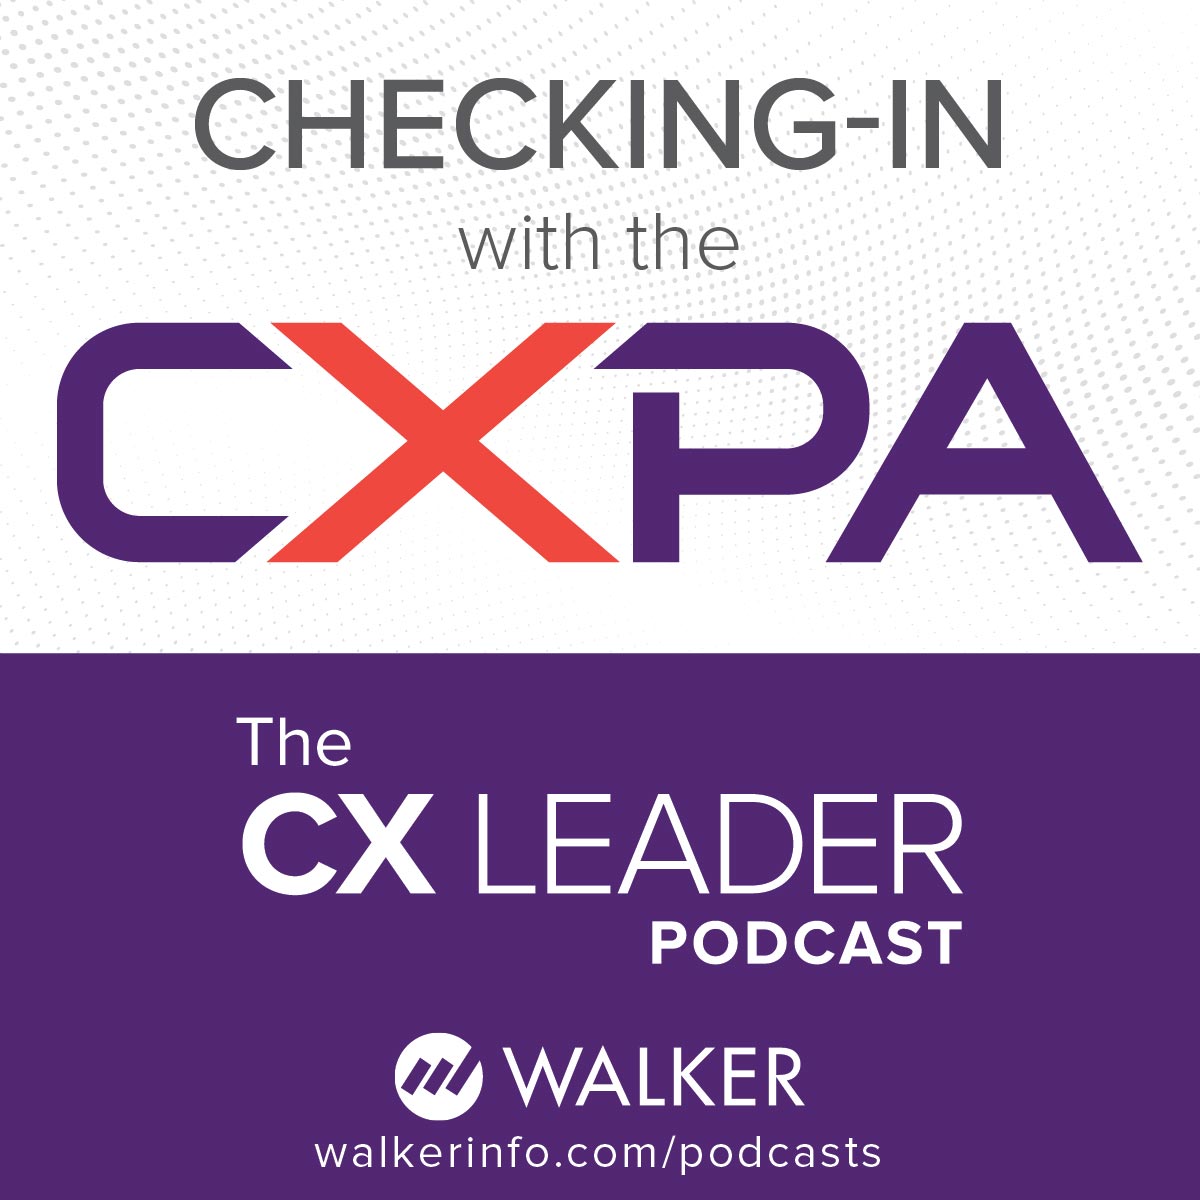 Checking-in with the CXPA